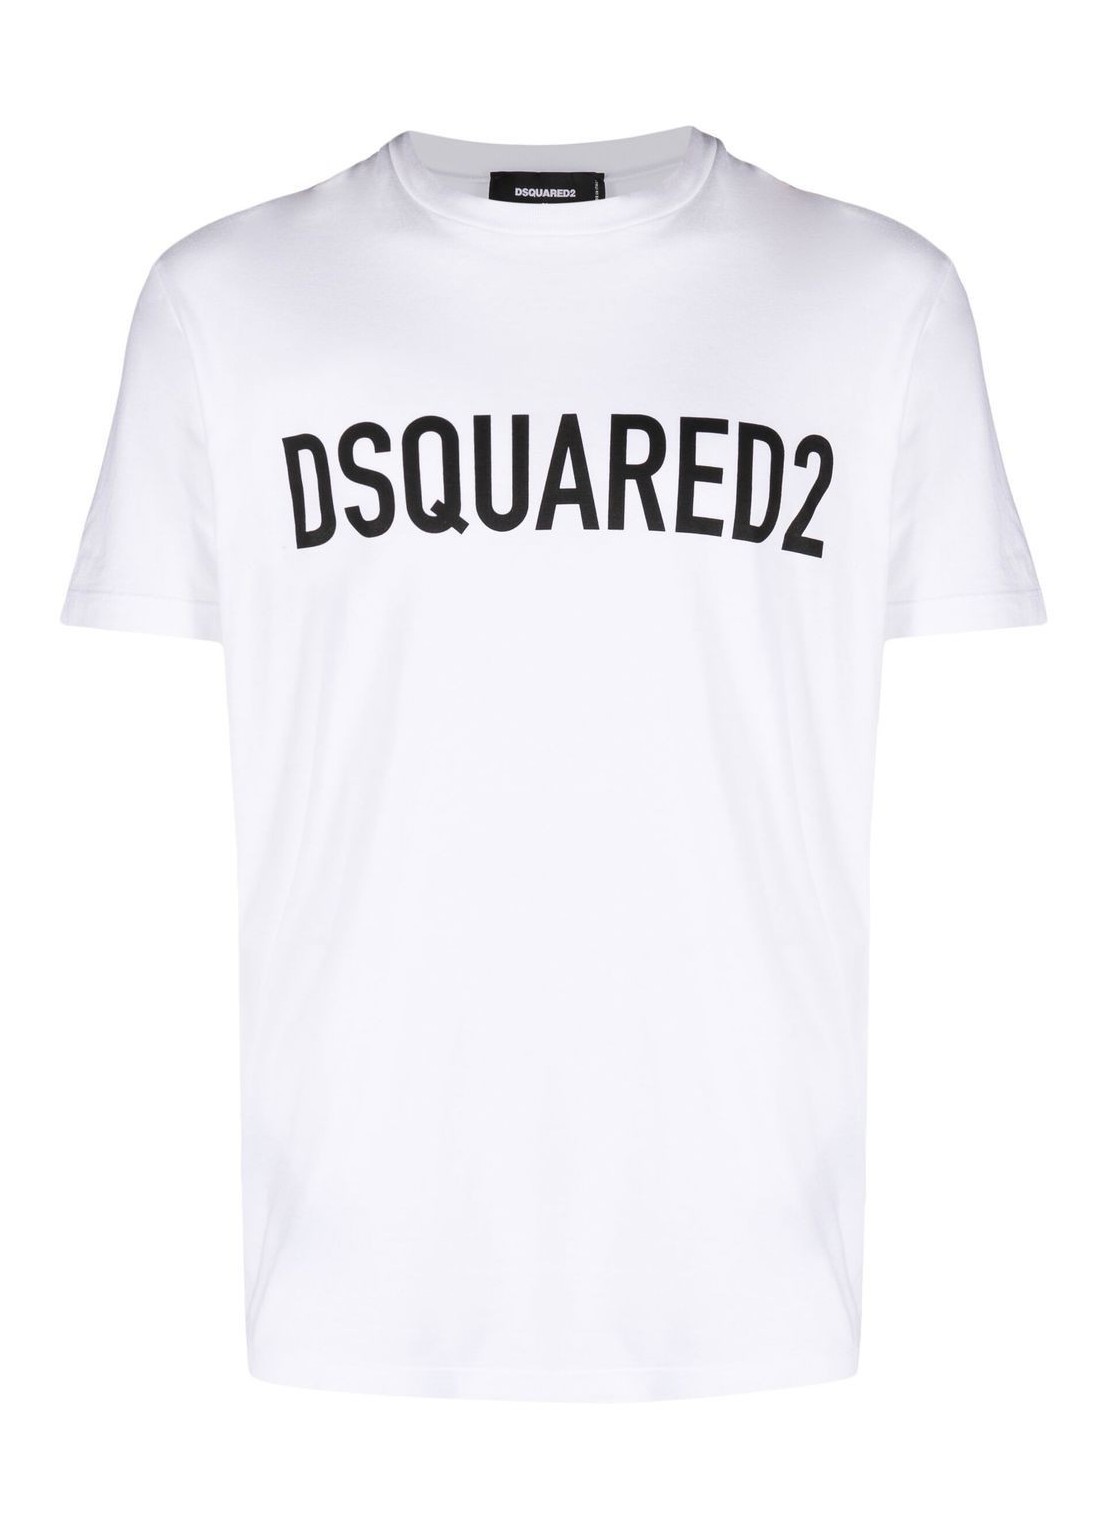 Camiseta dsquared t-shirt man dsquared2 cool tee s74gd1126s24321 100 talla blanco
 